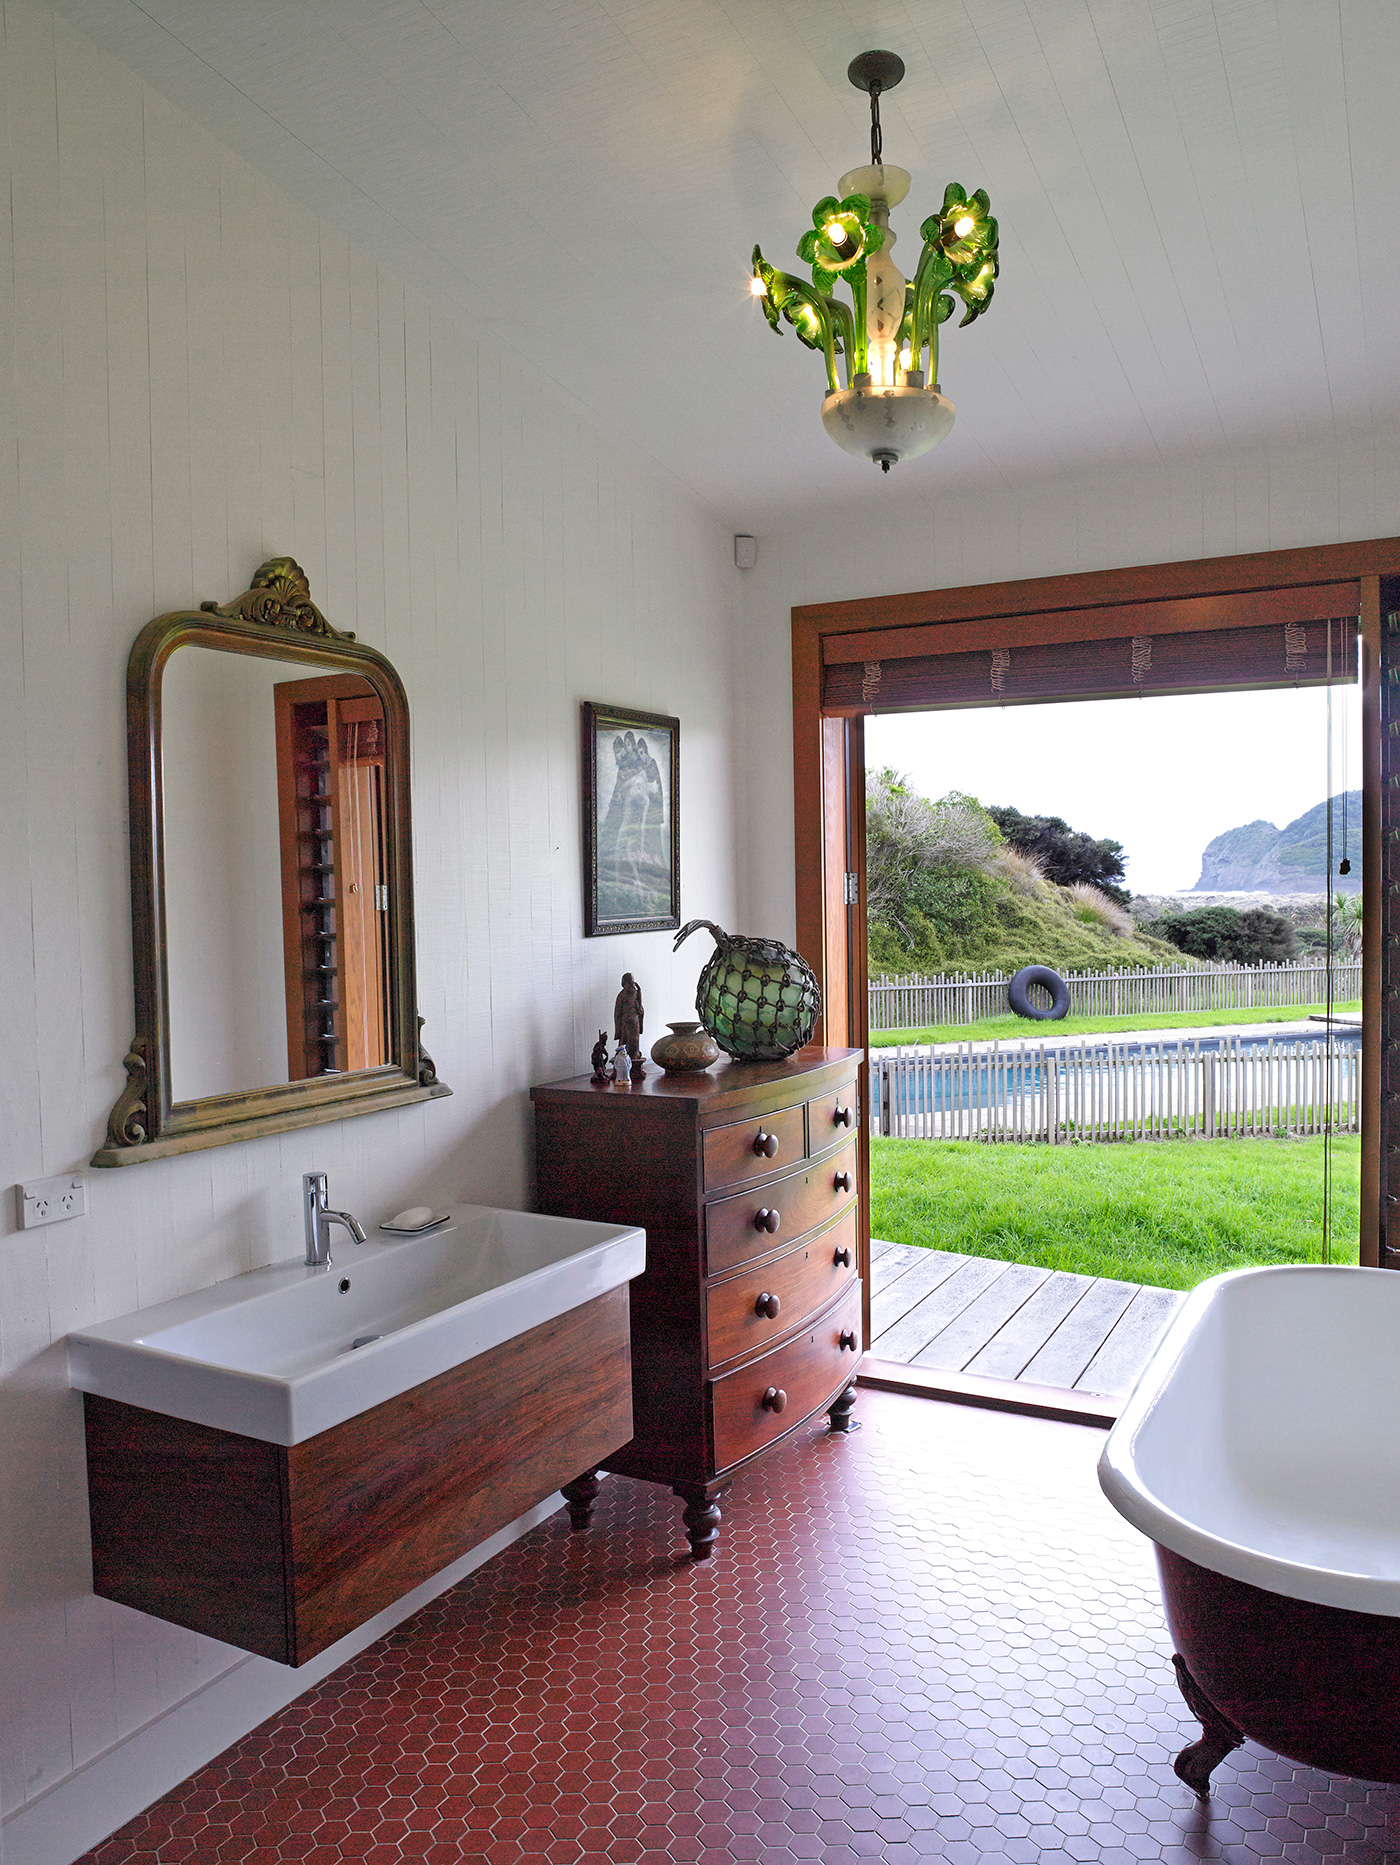 A bathroom in a home by Stevens Lawson. Photograph by Mark Smith.